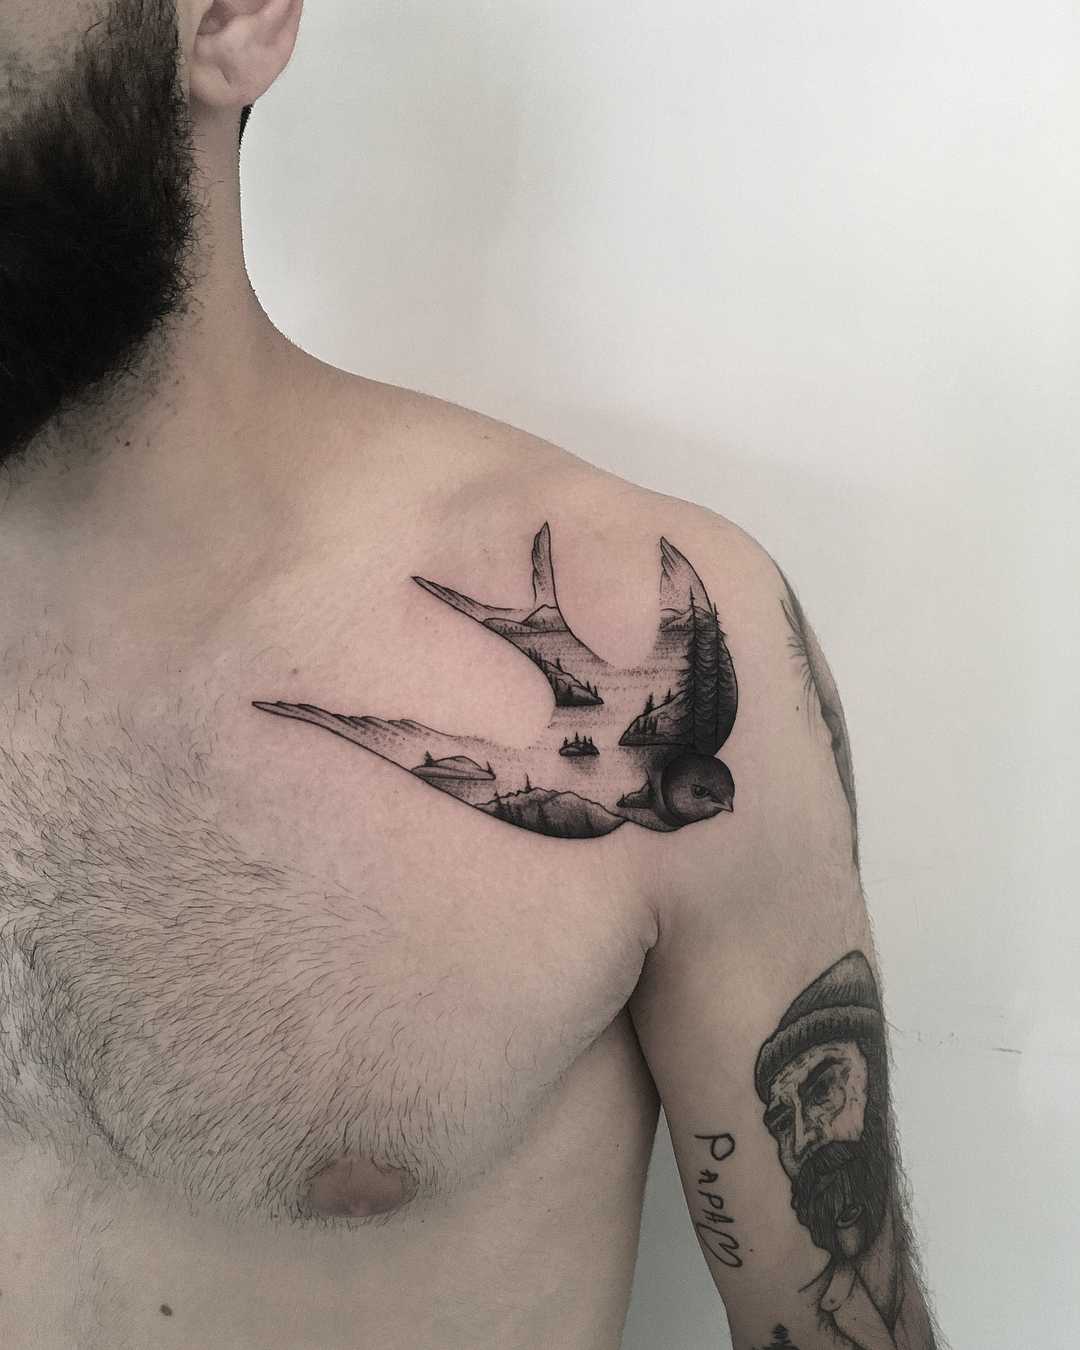 Double exposure swallow and scenery by tattooist Spence @zz tattoo